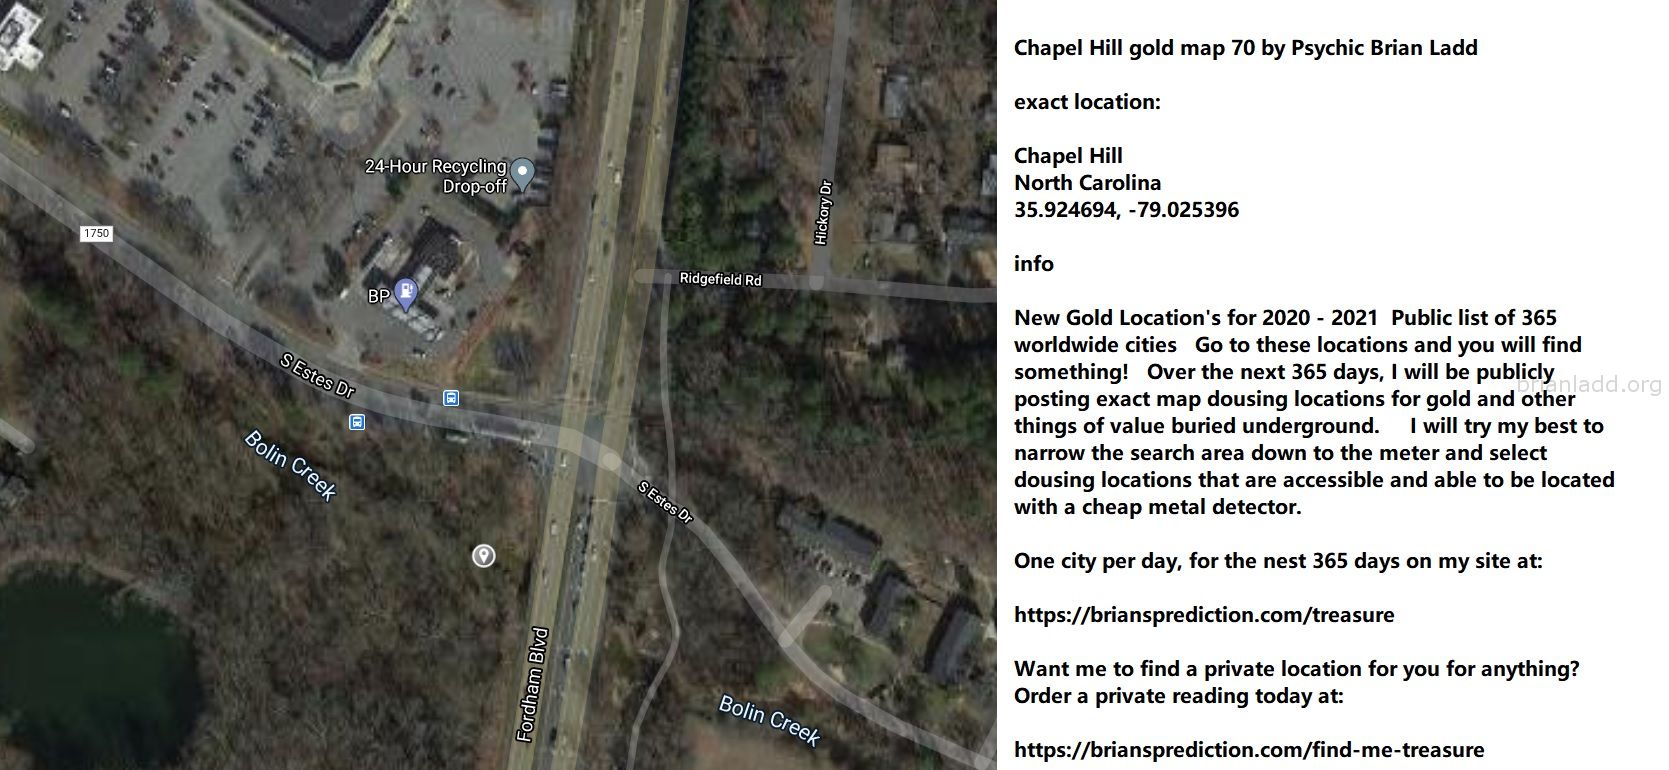 Chapel Hill gold map 70 by Psychic Brian Ladd
New Gold Location's for 2020 - 2021  Public list of 365 worldwide cities   Go to these locations and you will find something!   Over the next 365 days, I will be publicly posting exact map dousing locations for gold and other things of value buried underground.     I will try my best to narrow the search area down to the meter and select dousing locations that are accessible and able to be located with a cheap metal detector. One city per day, for the nest 365 days on my site at:  https://briansprediction.com/treasure  Want me to find a private location for you for anything?  Order a private reading today at:  https://briansprediction.com/find-me-treasure
